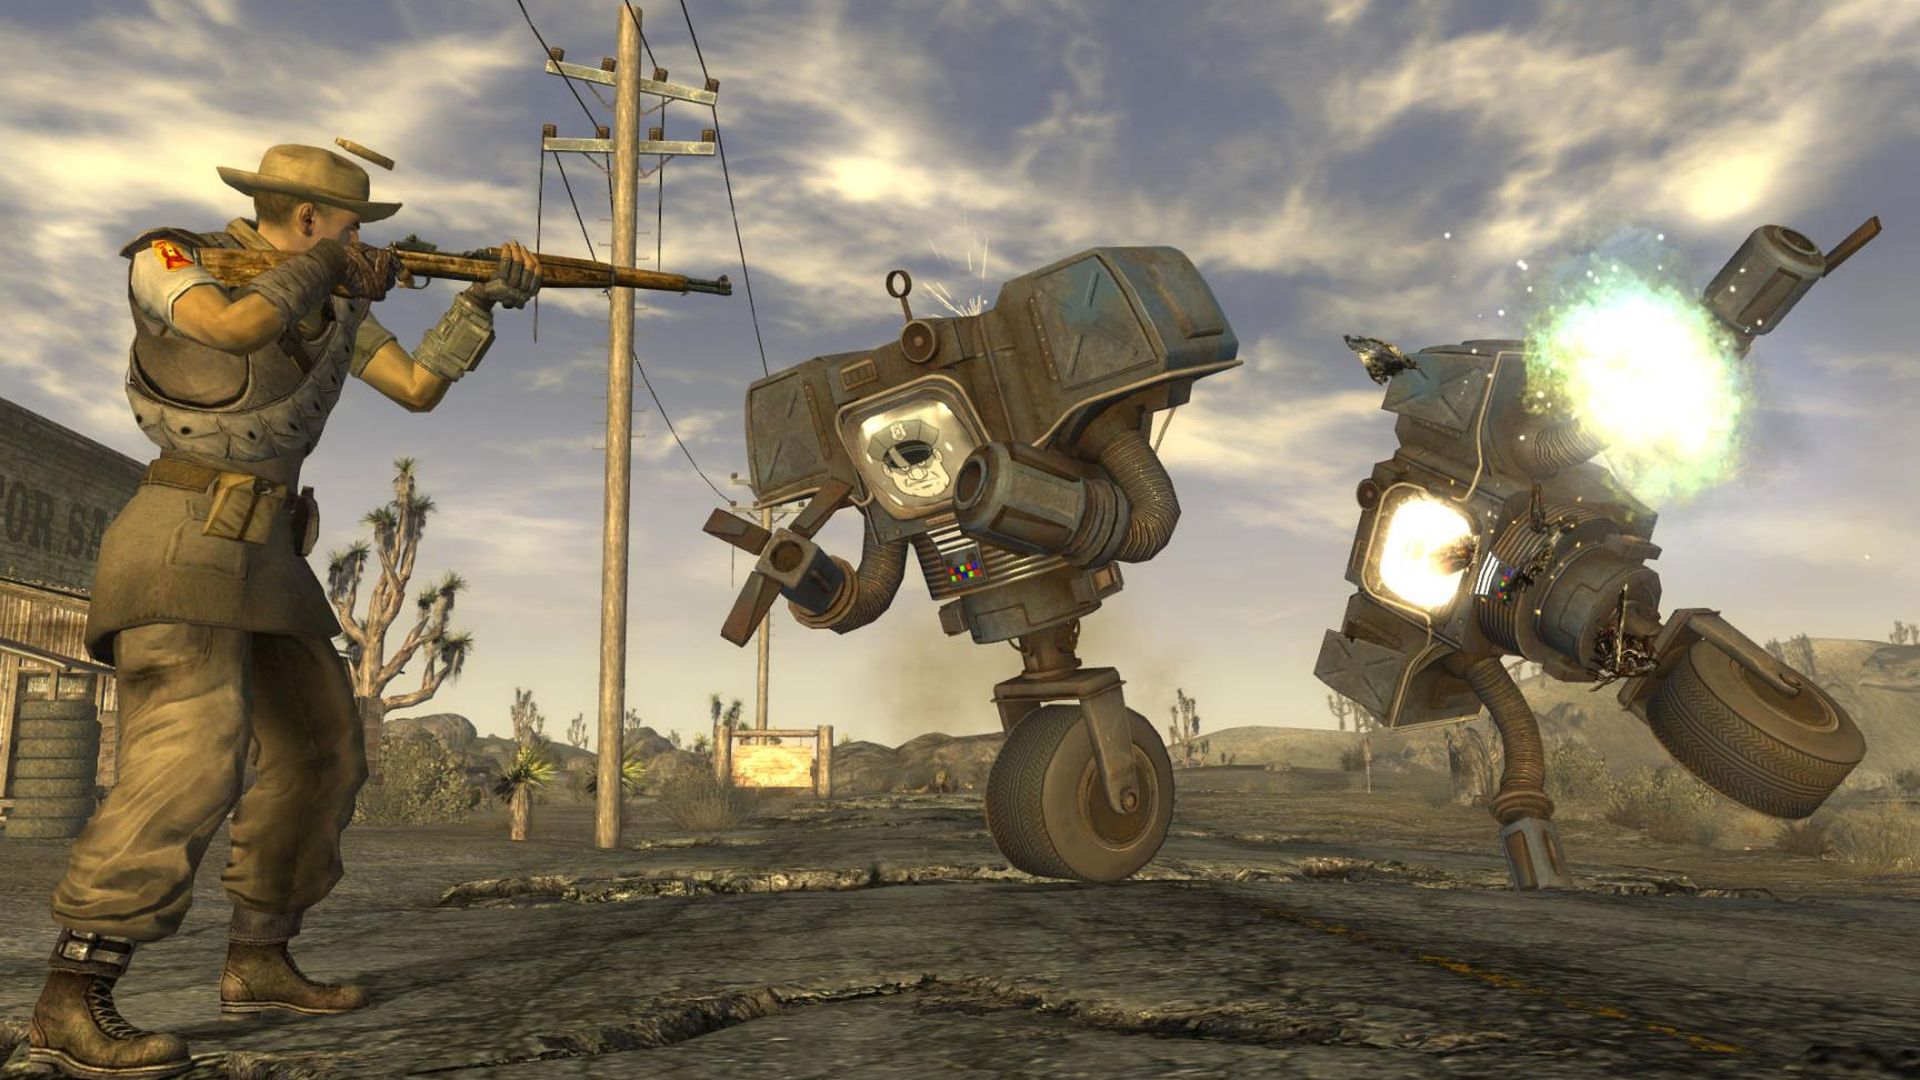 Fallout 4 Update Branch Fuels Speculation About Fallout: New Vegas Sequel